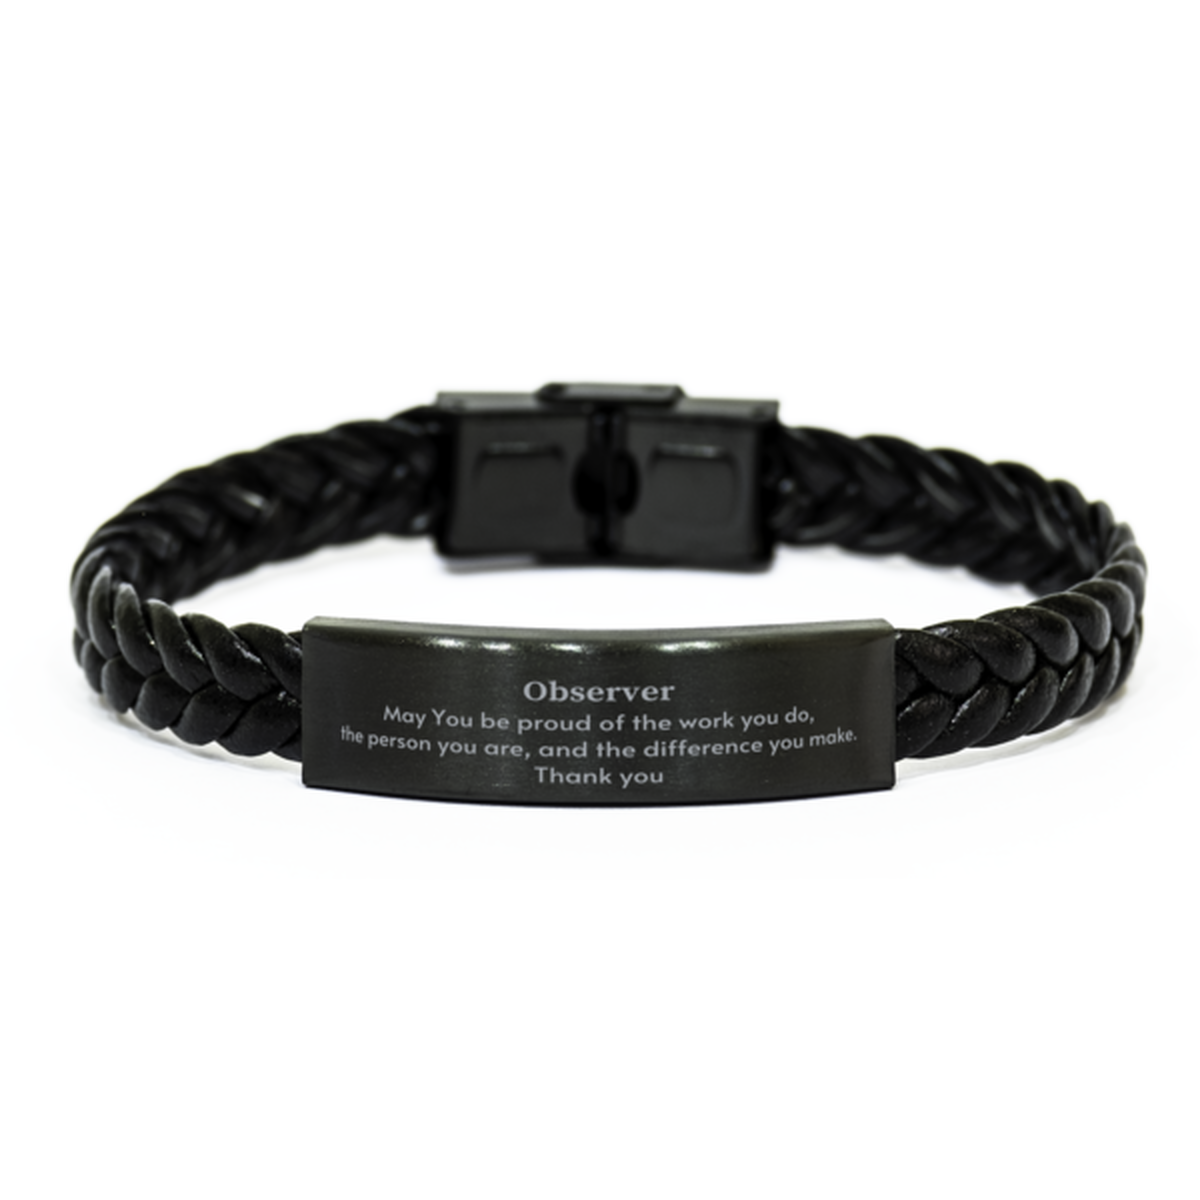 Heartwarming Braided Leather Bracelet Retirement Coworkers Gifts for Observer, Observer May You be proud of the work you do, the person you are Gifts for Boss Men Women Friends